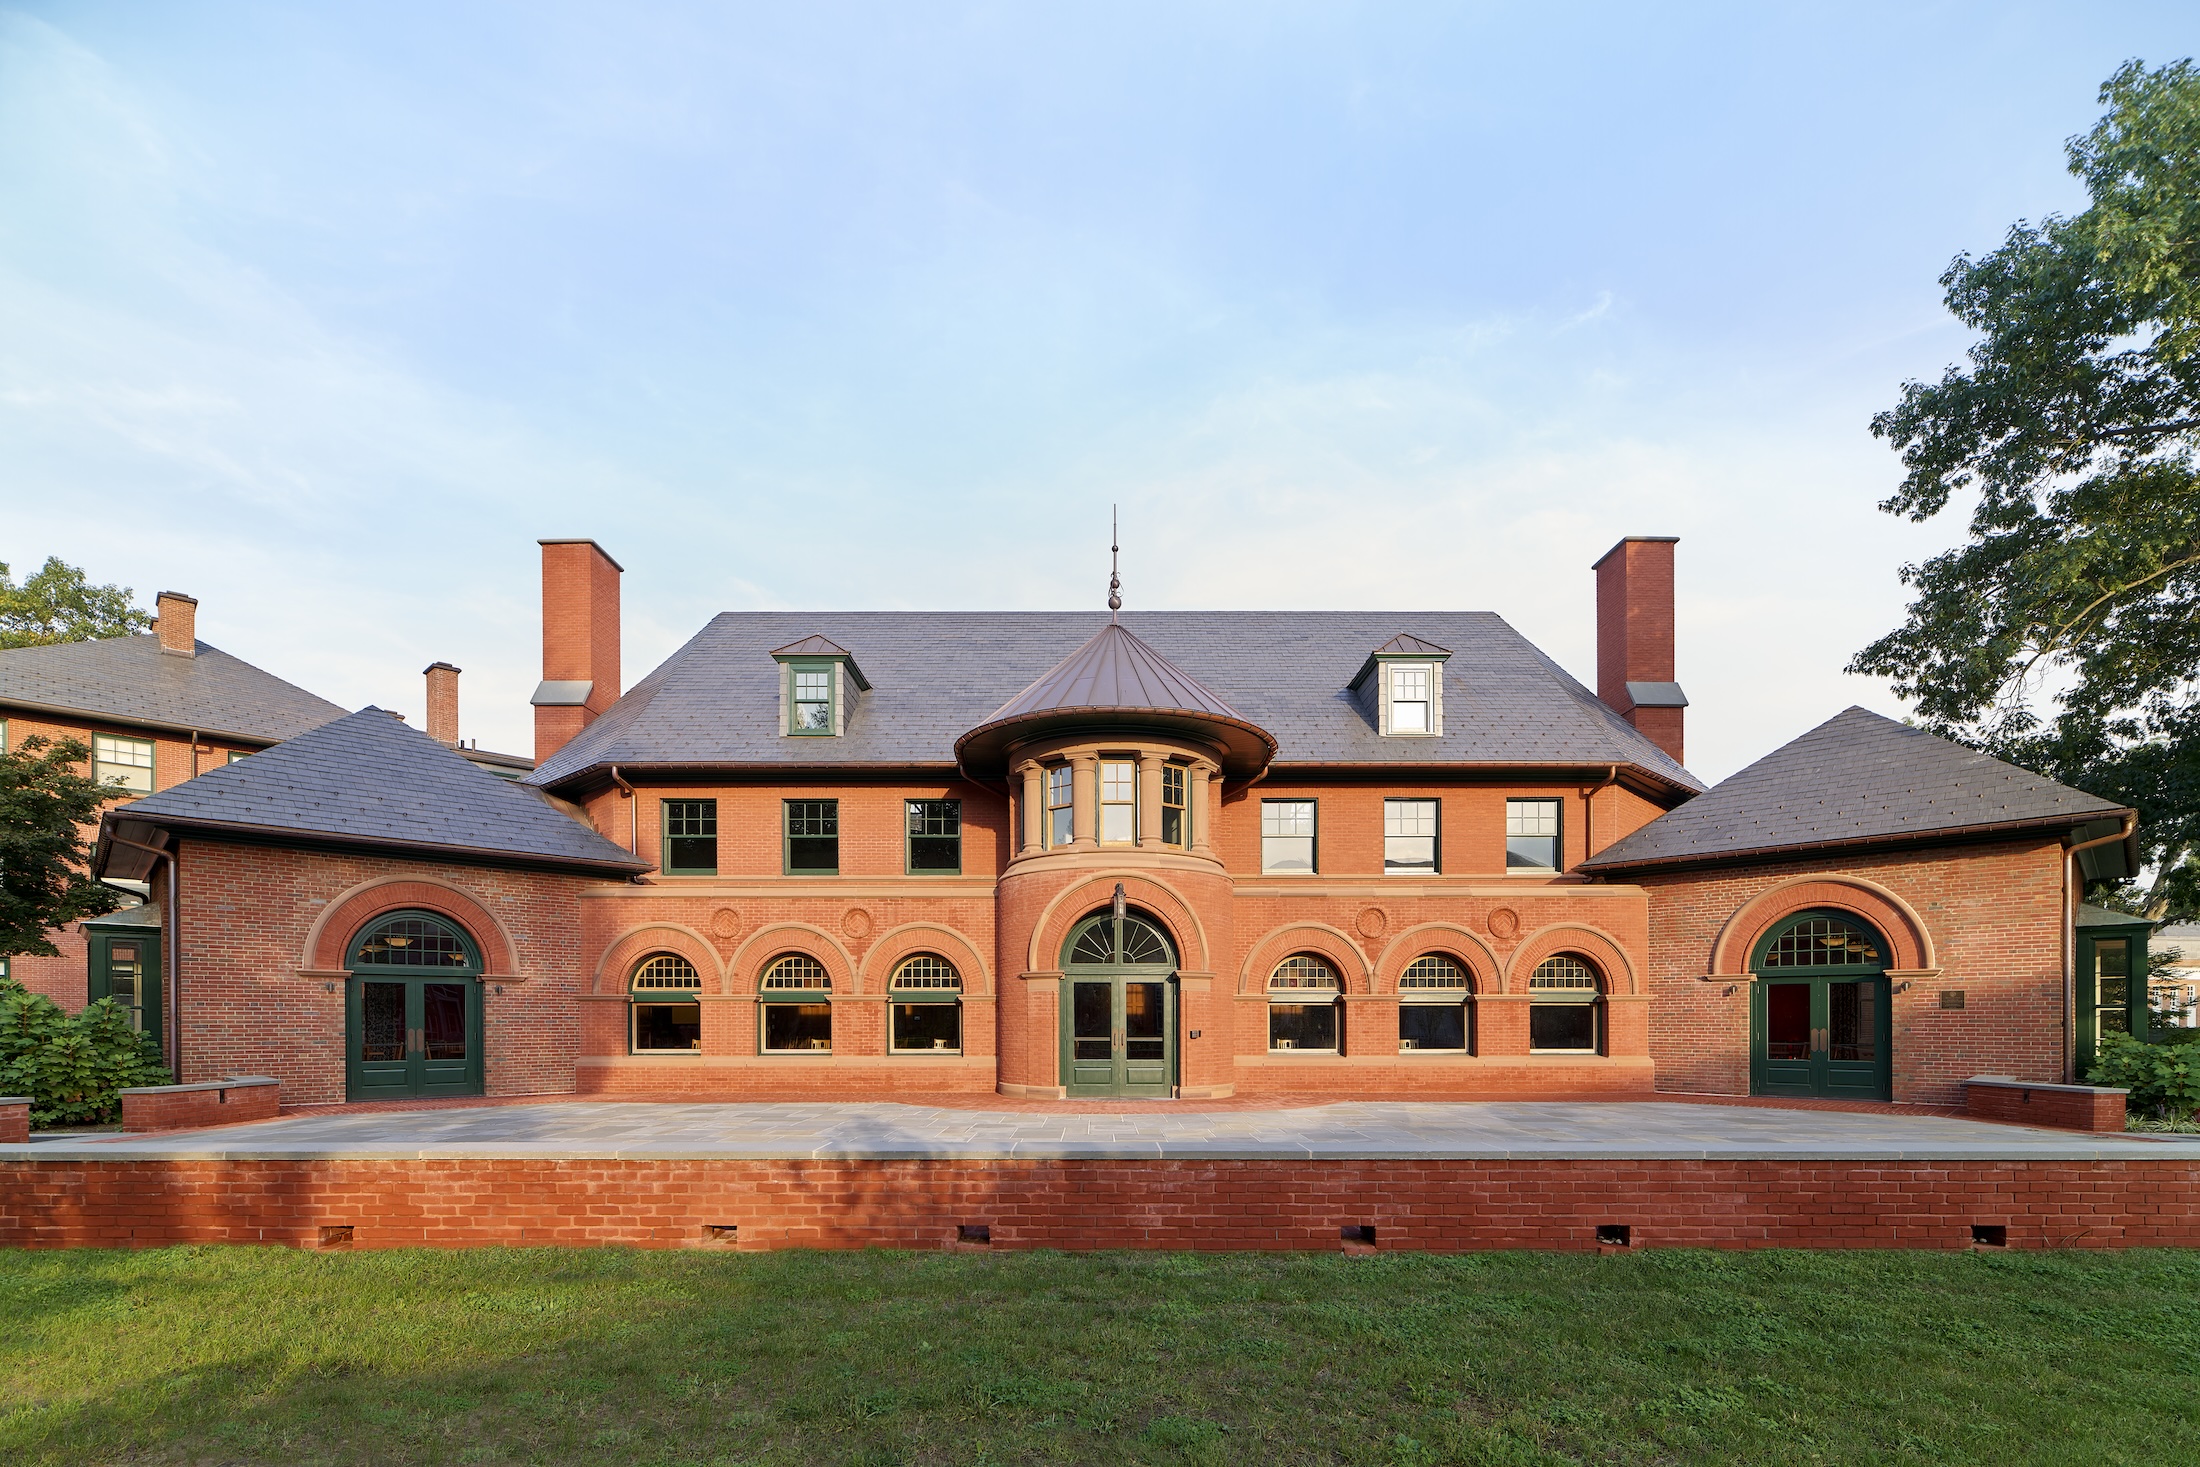 the lawrenceville school